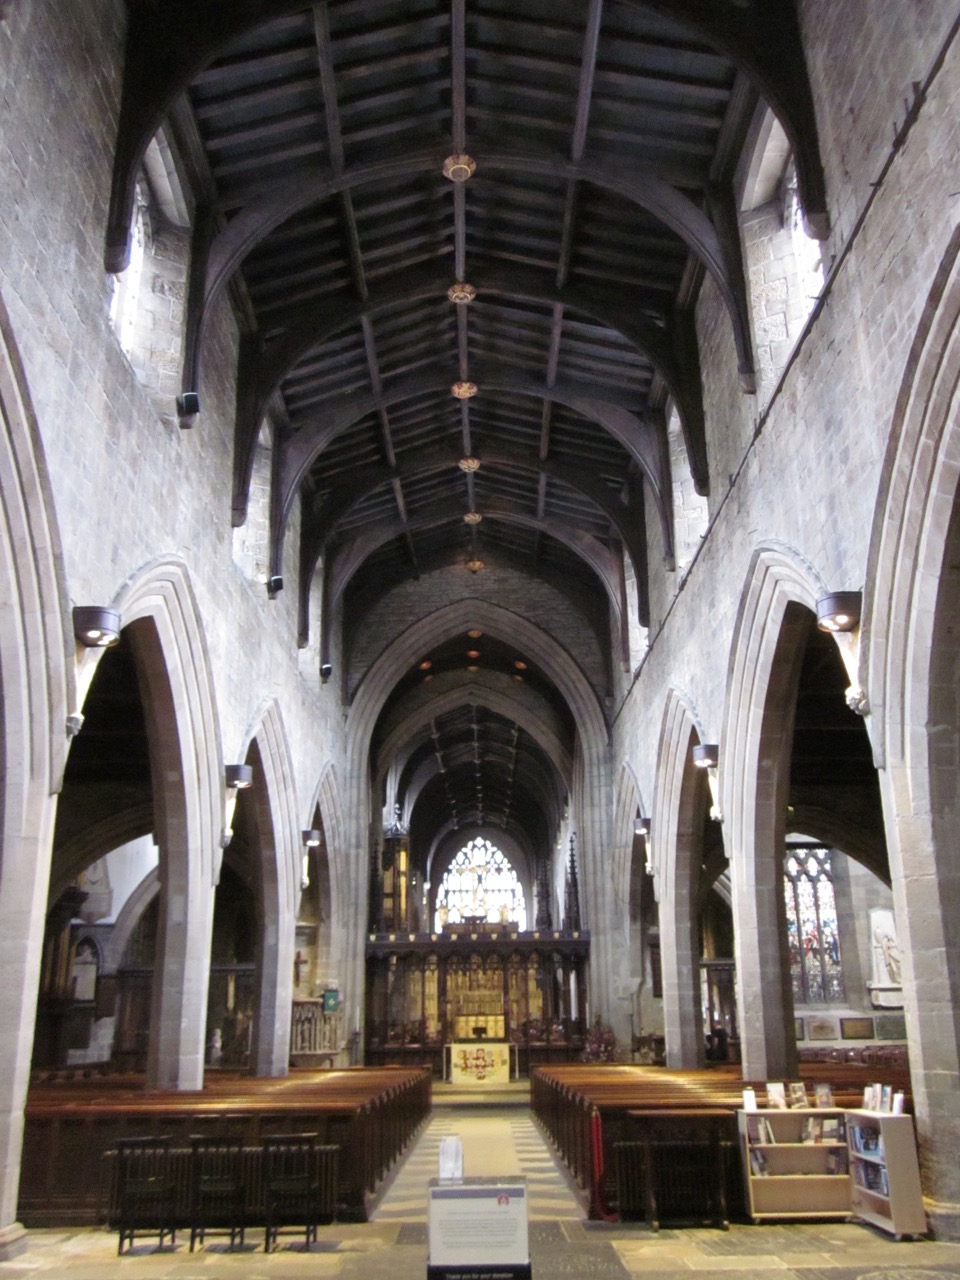 St Nicholas Cathedral, interior view